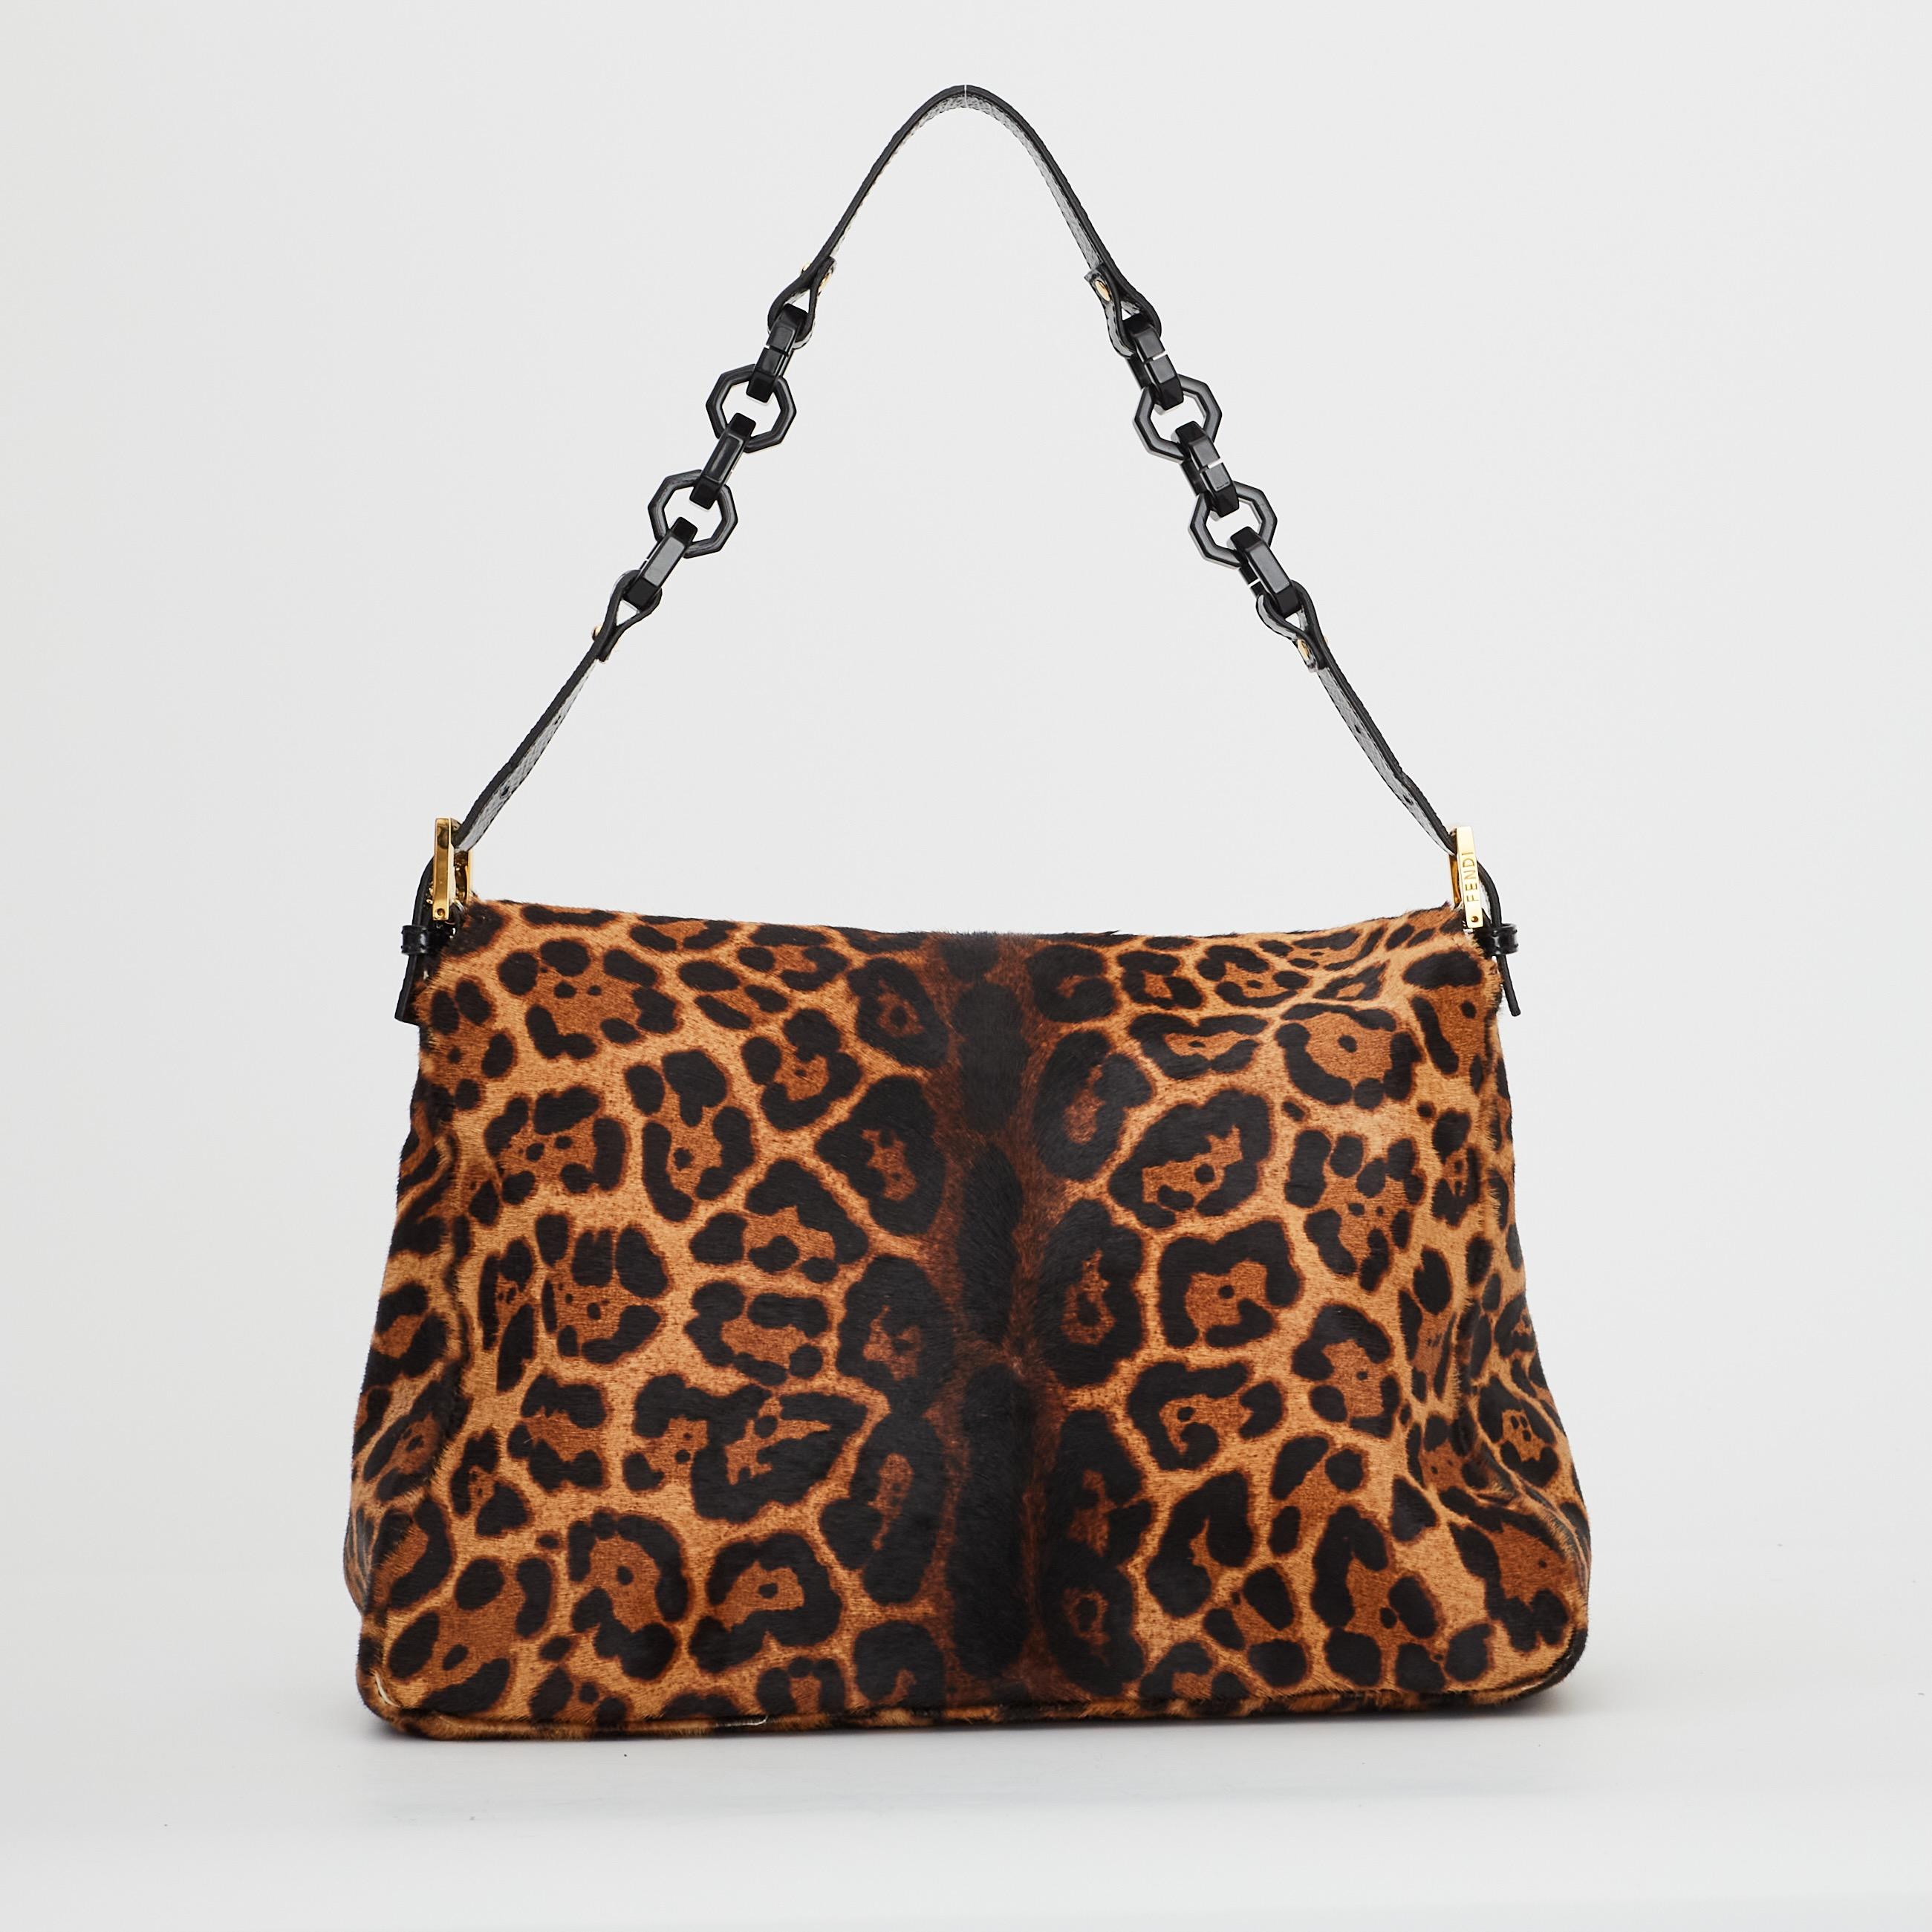 This mama baguette is made of light brown leopard print calf hair. The bag features shoulder link shoulder strap of resin with a leather shoulder pad, a front flap with a resin FF detail on the flap buckle, snap closure and woven fabric interior